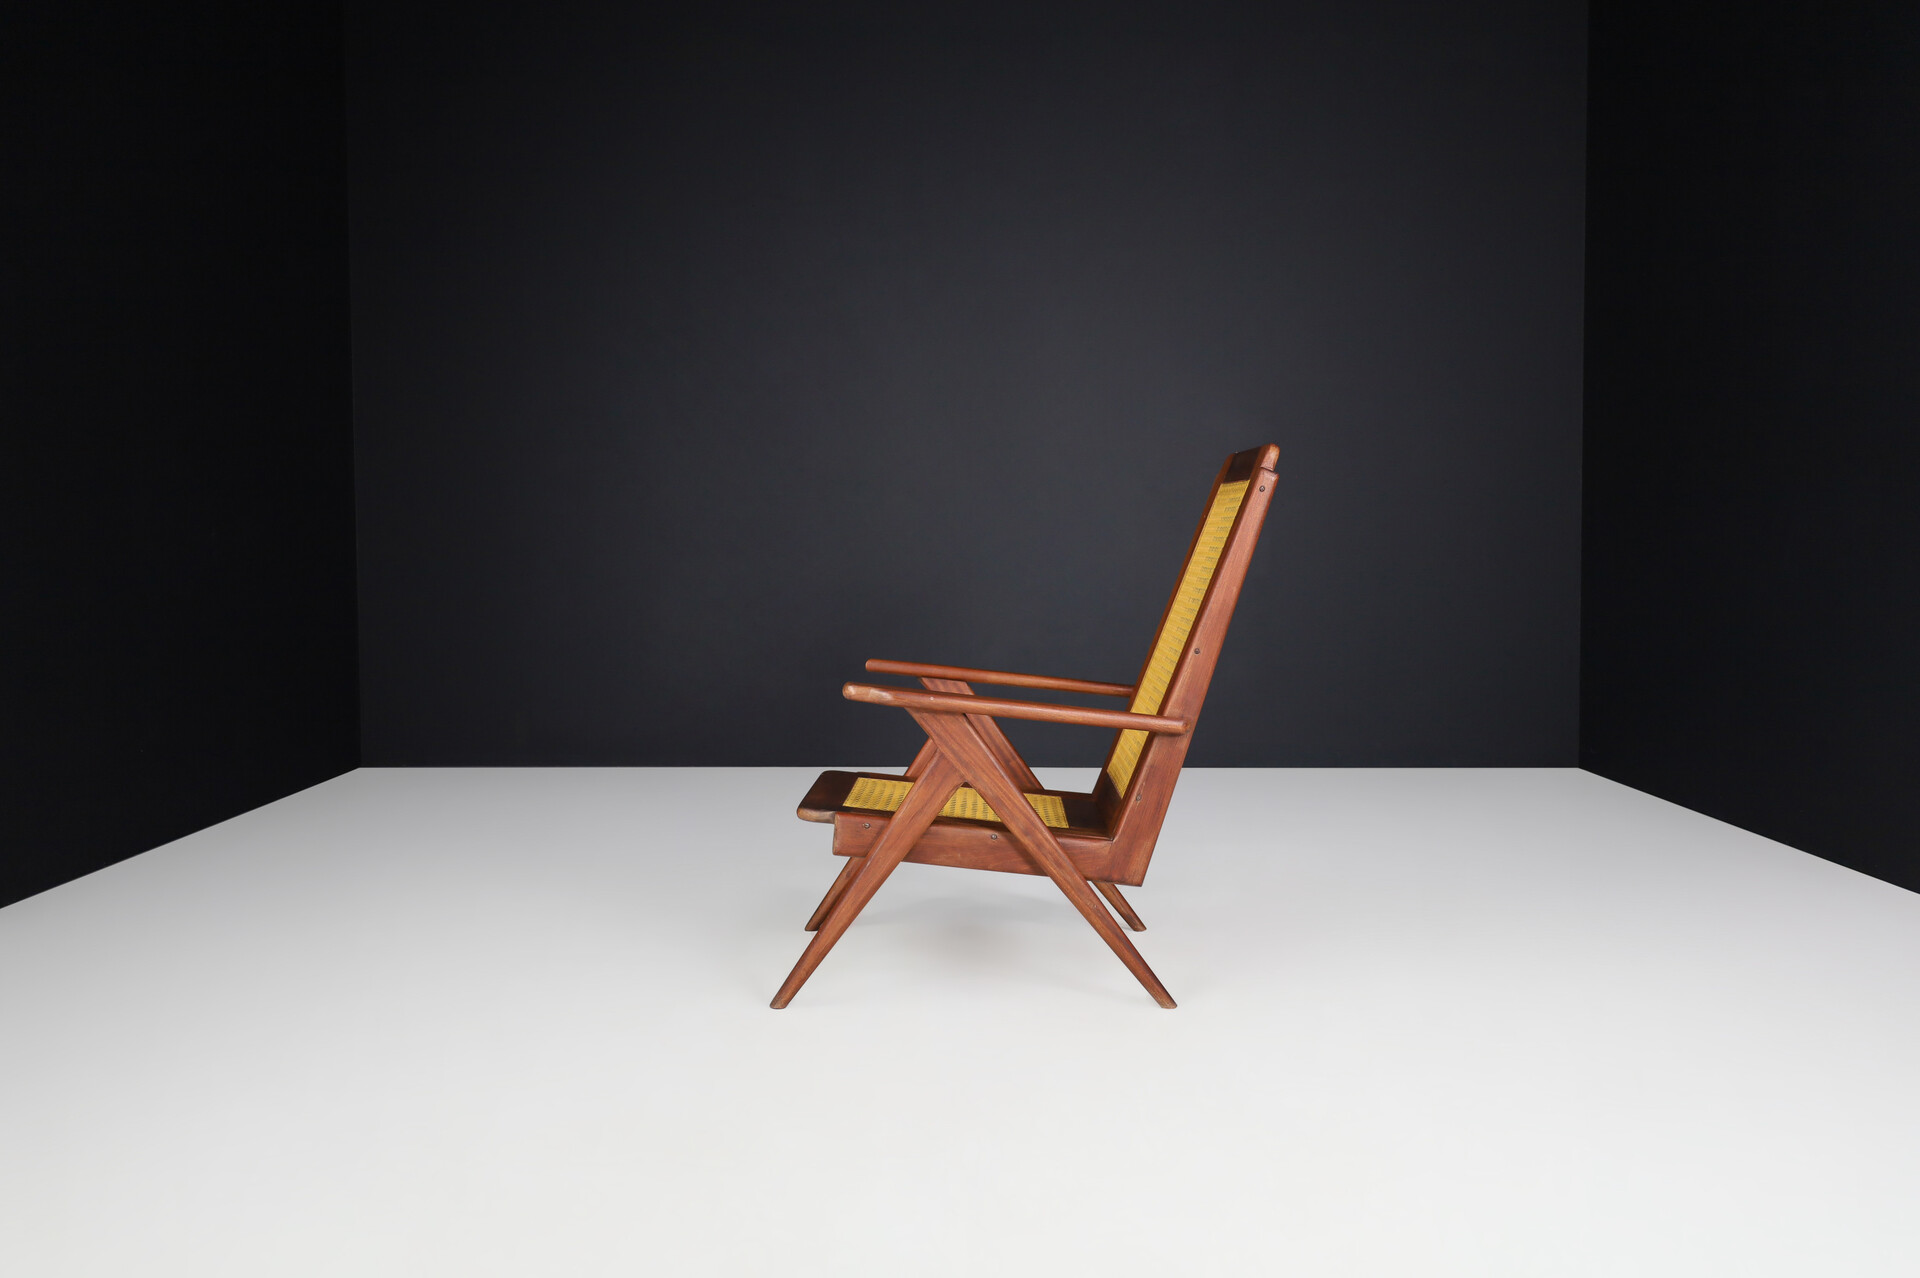 Mid century modern Lounge Chairs with mahogany Structure and Webbing in the style of Pierre Jeanneret , France, 1950s Mid-20th century